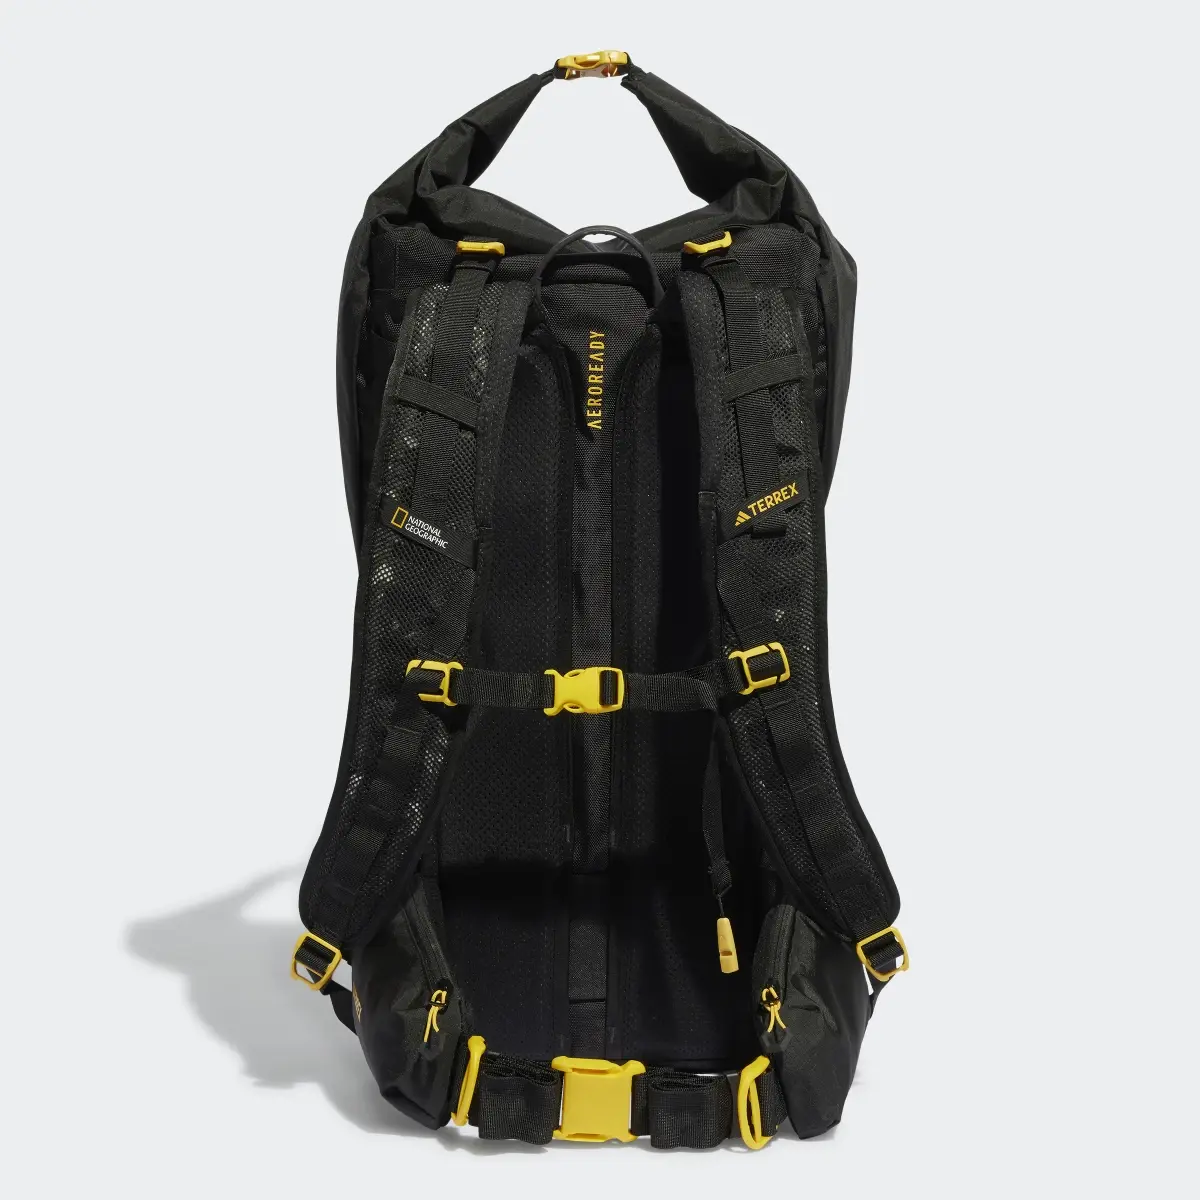 Adidas Colorful x National Geographic AEROREADY Backpack. 3